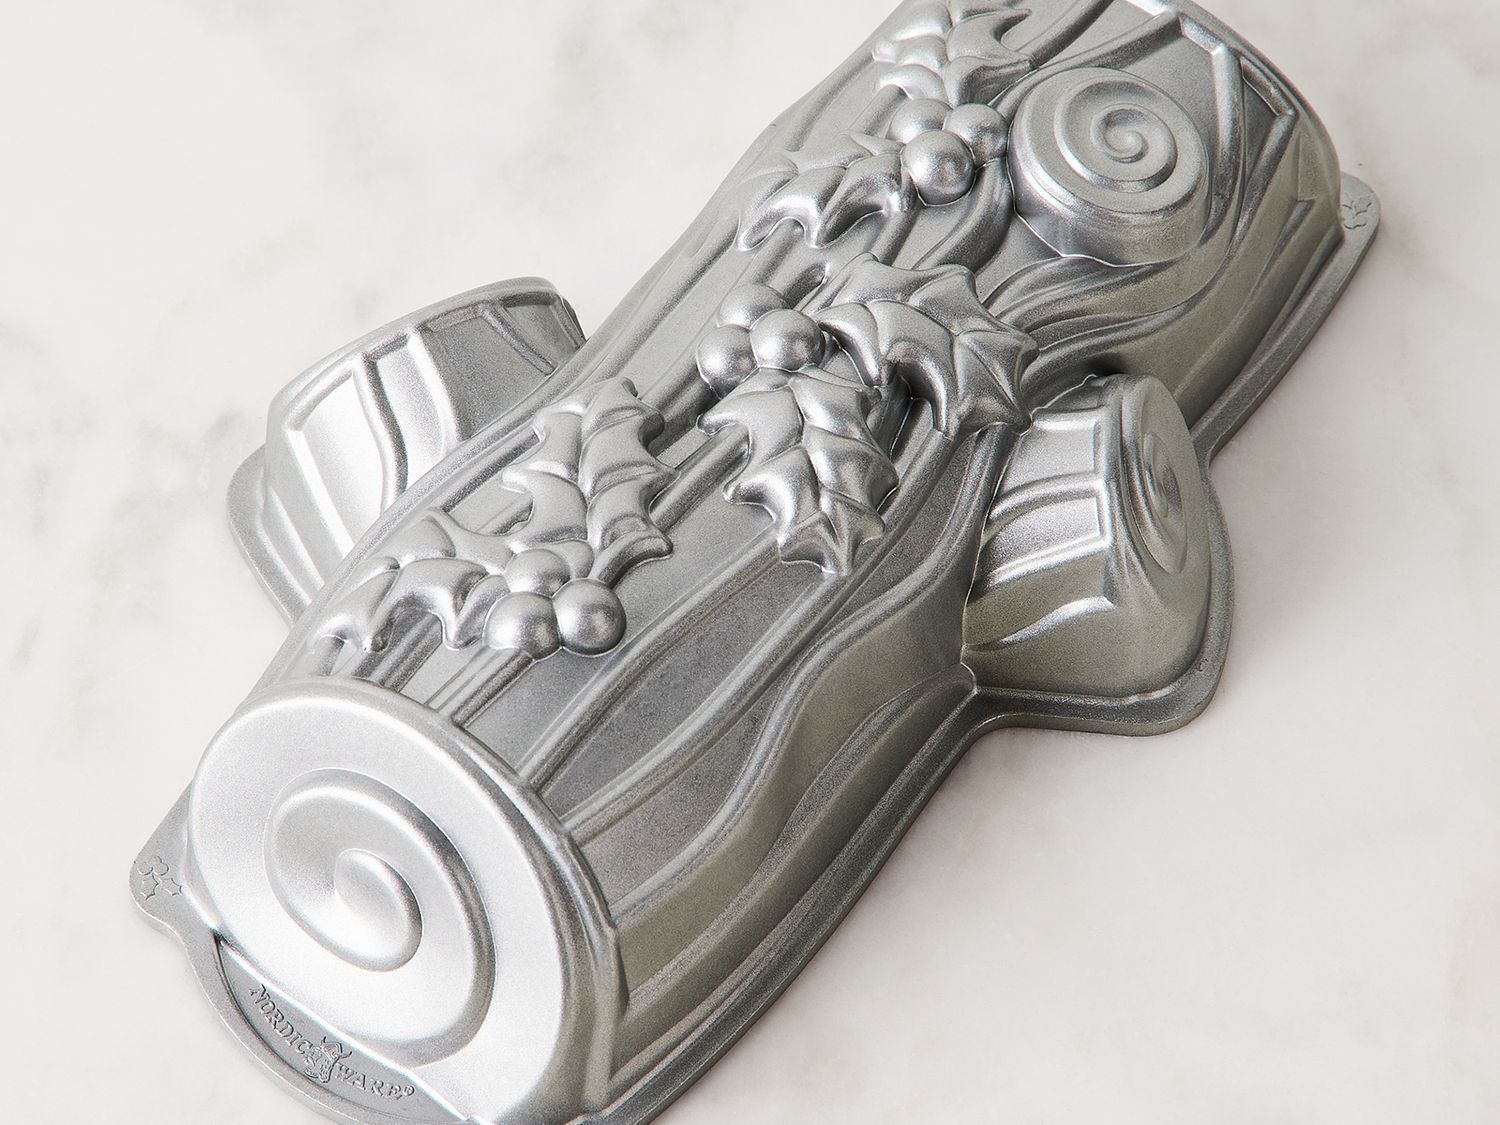  Nordic Ware Yule Log Pan, One Size, Silver: Novelty Cake Pans:  Home & Kitchen